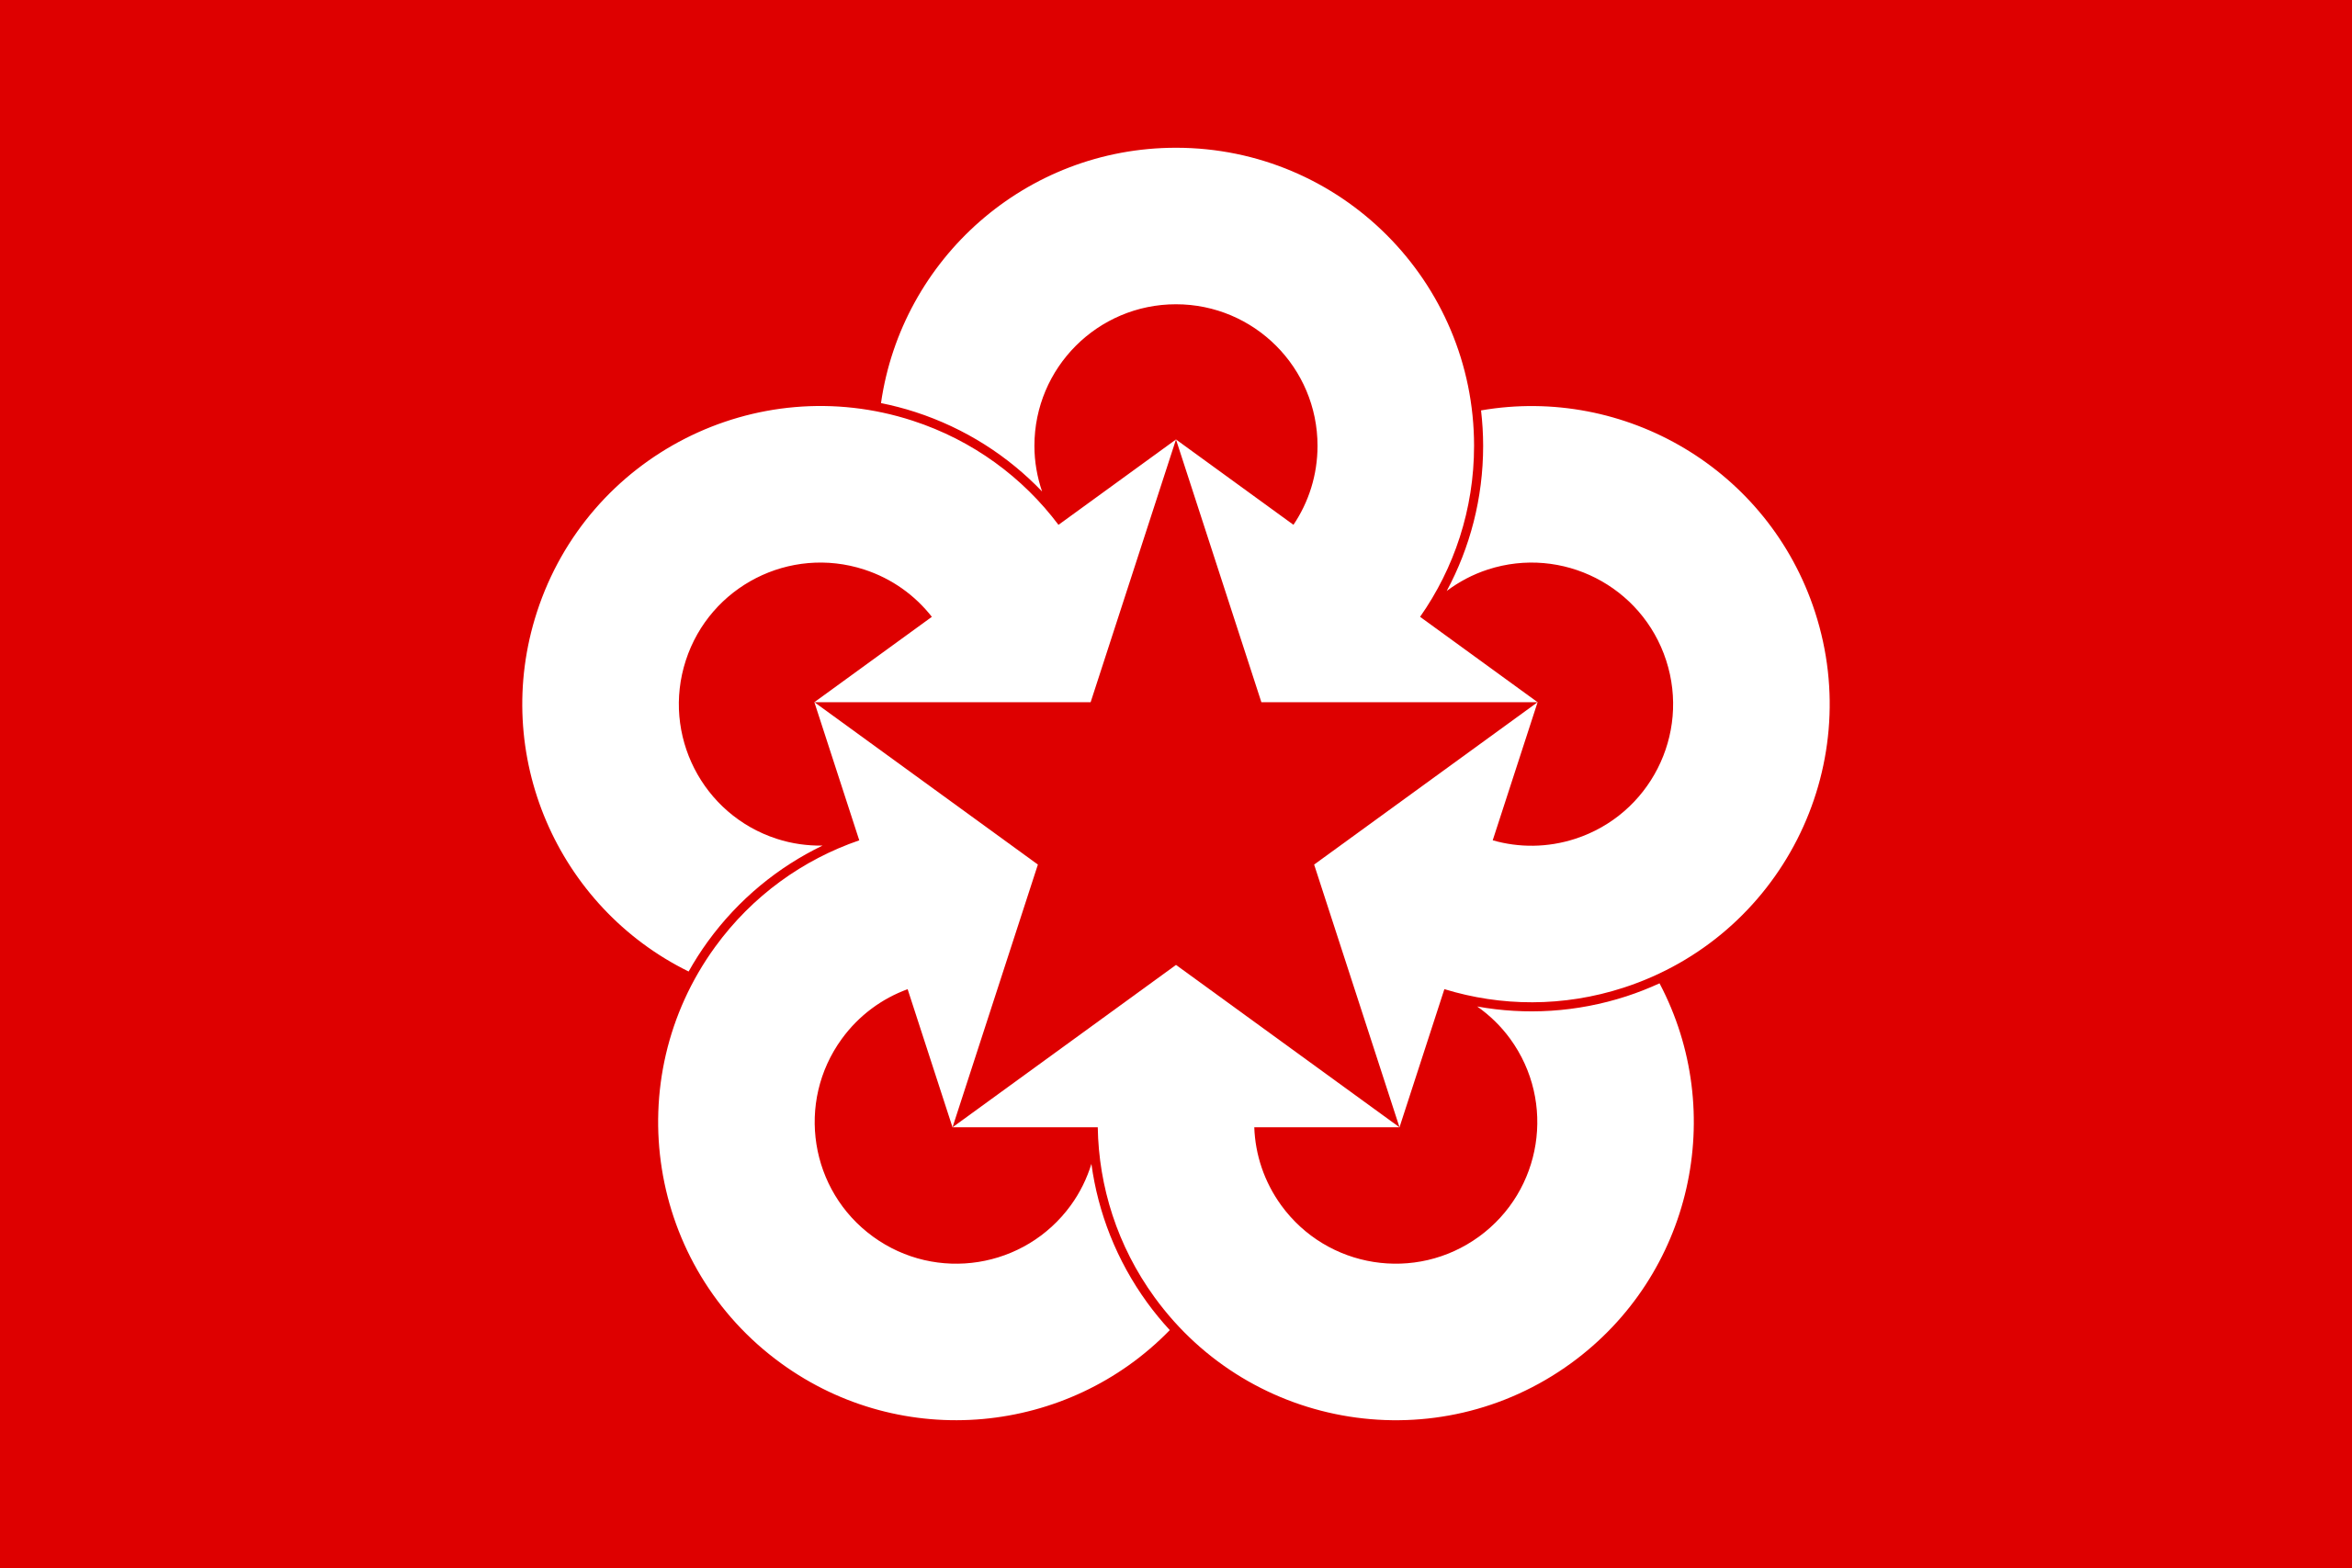 File:Comecon flag.png